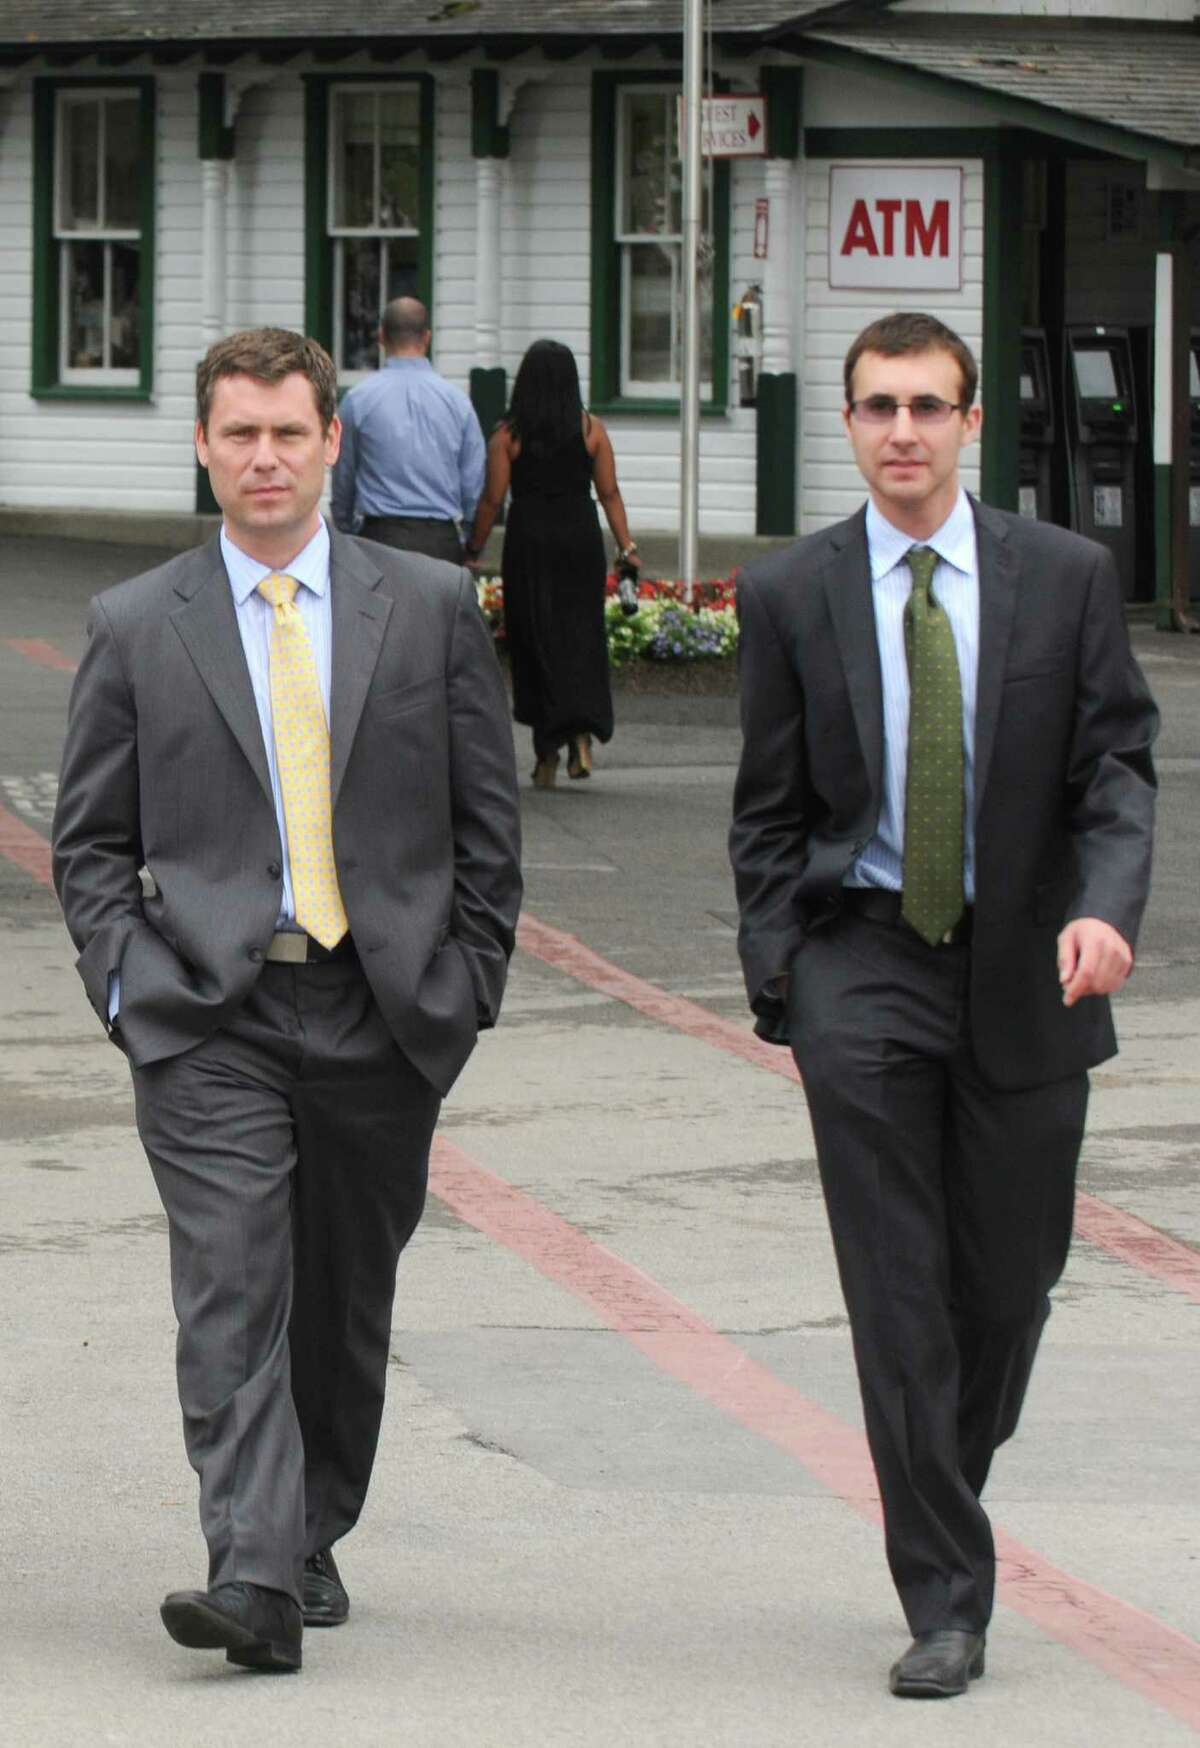 David O'Rourke, left, NYRA vice president and chief revenue officer, in 2014 with Dan Silver, at the time NYRA's director of television & interactive platforms at Saratoga Race Course. (Michael P. Farrell/Times Union)